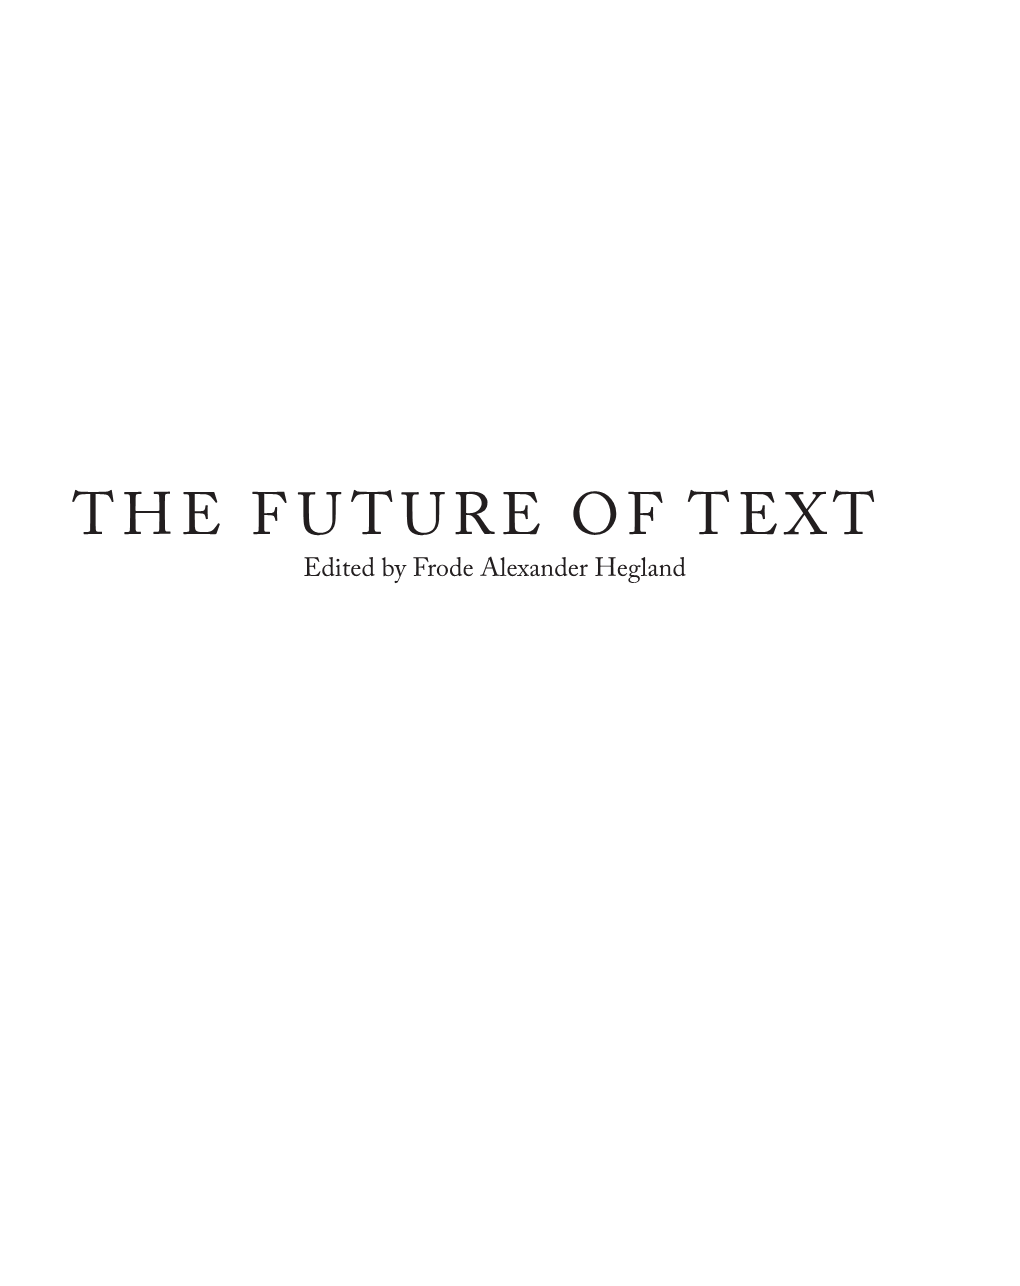 Future of Text Book 2020 PDF.Indd